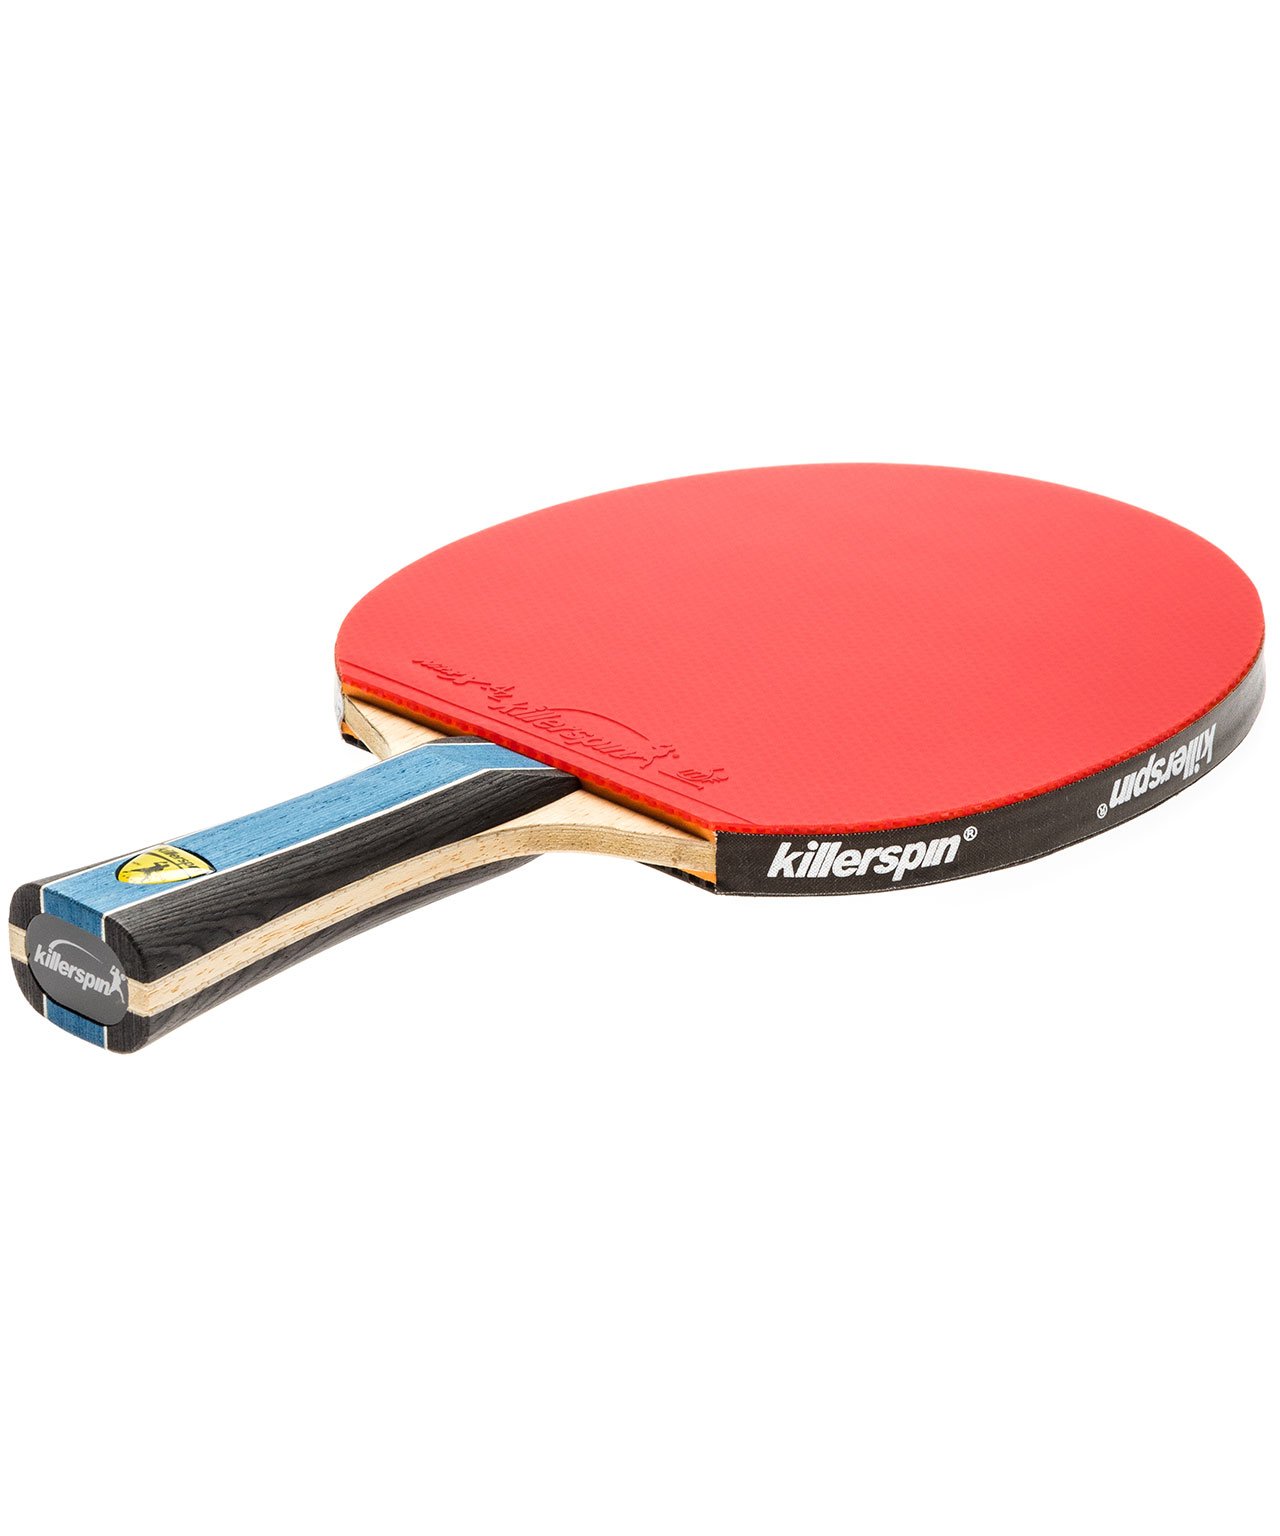 Killerspin Ping Pong Paddle Kido 5A RTG - Flared Red Rubber